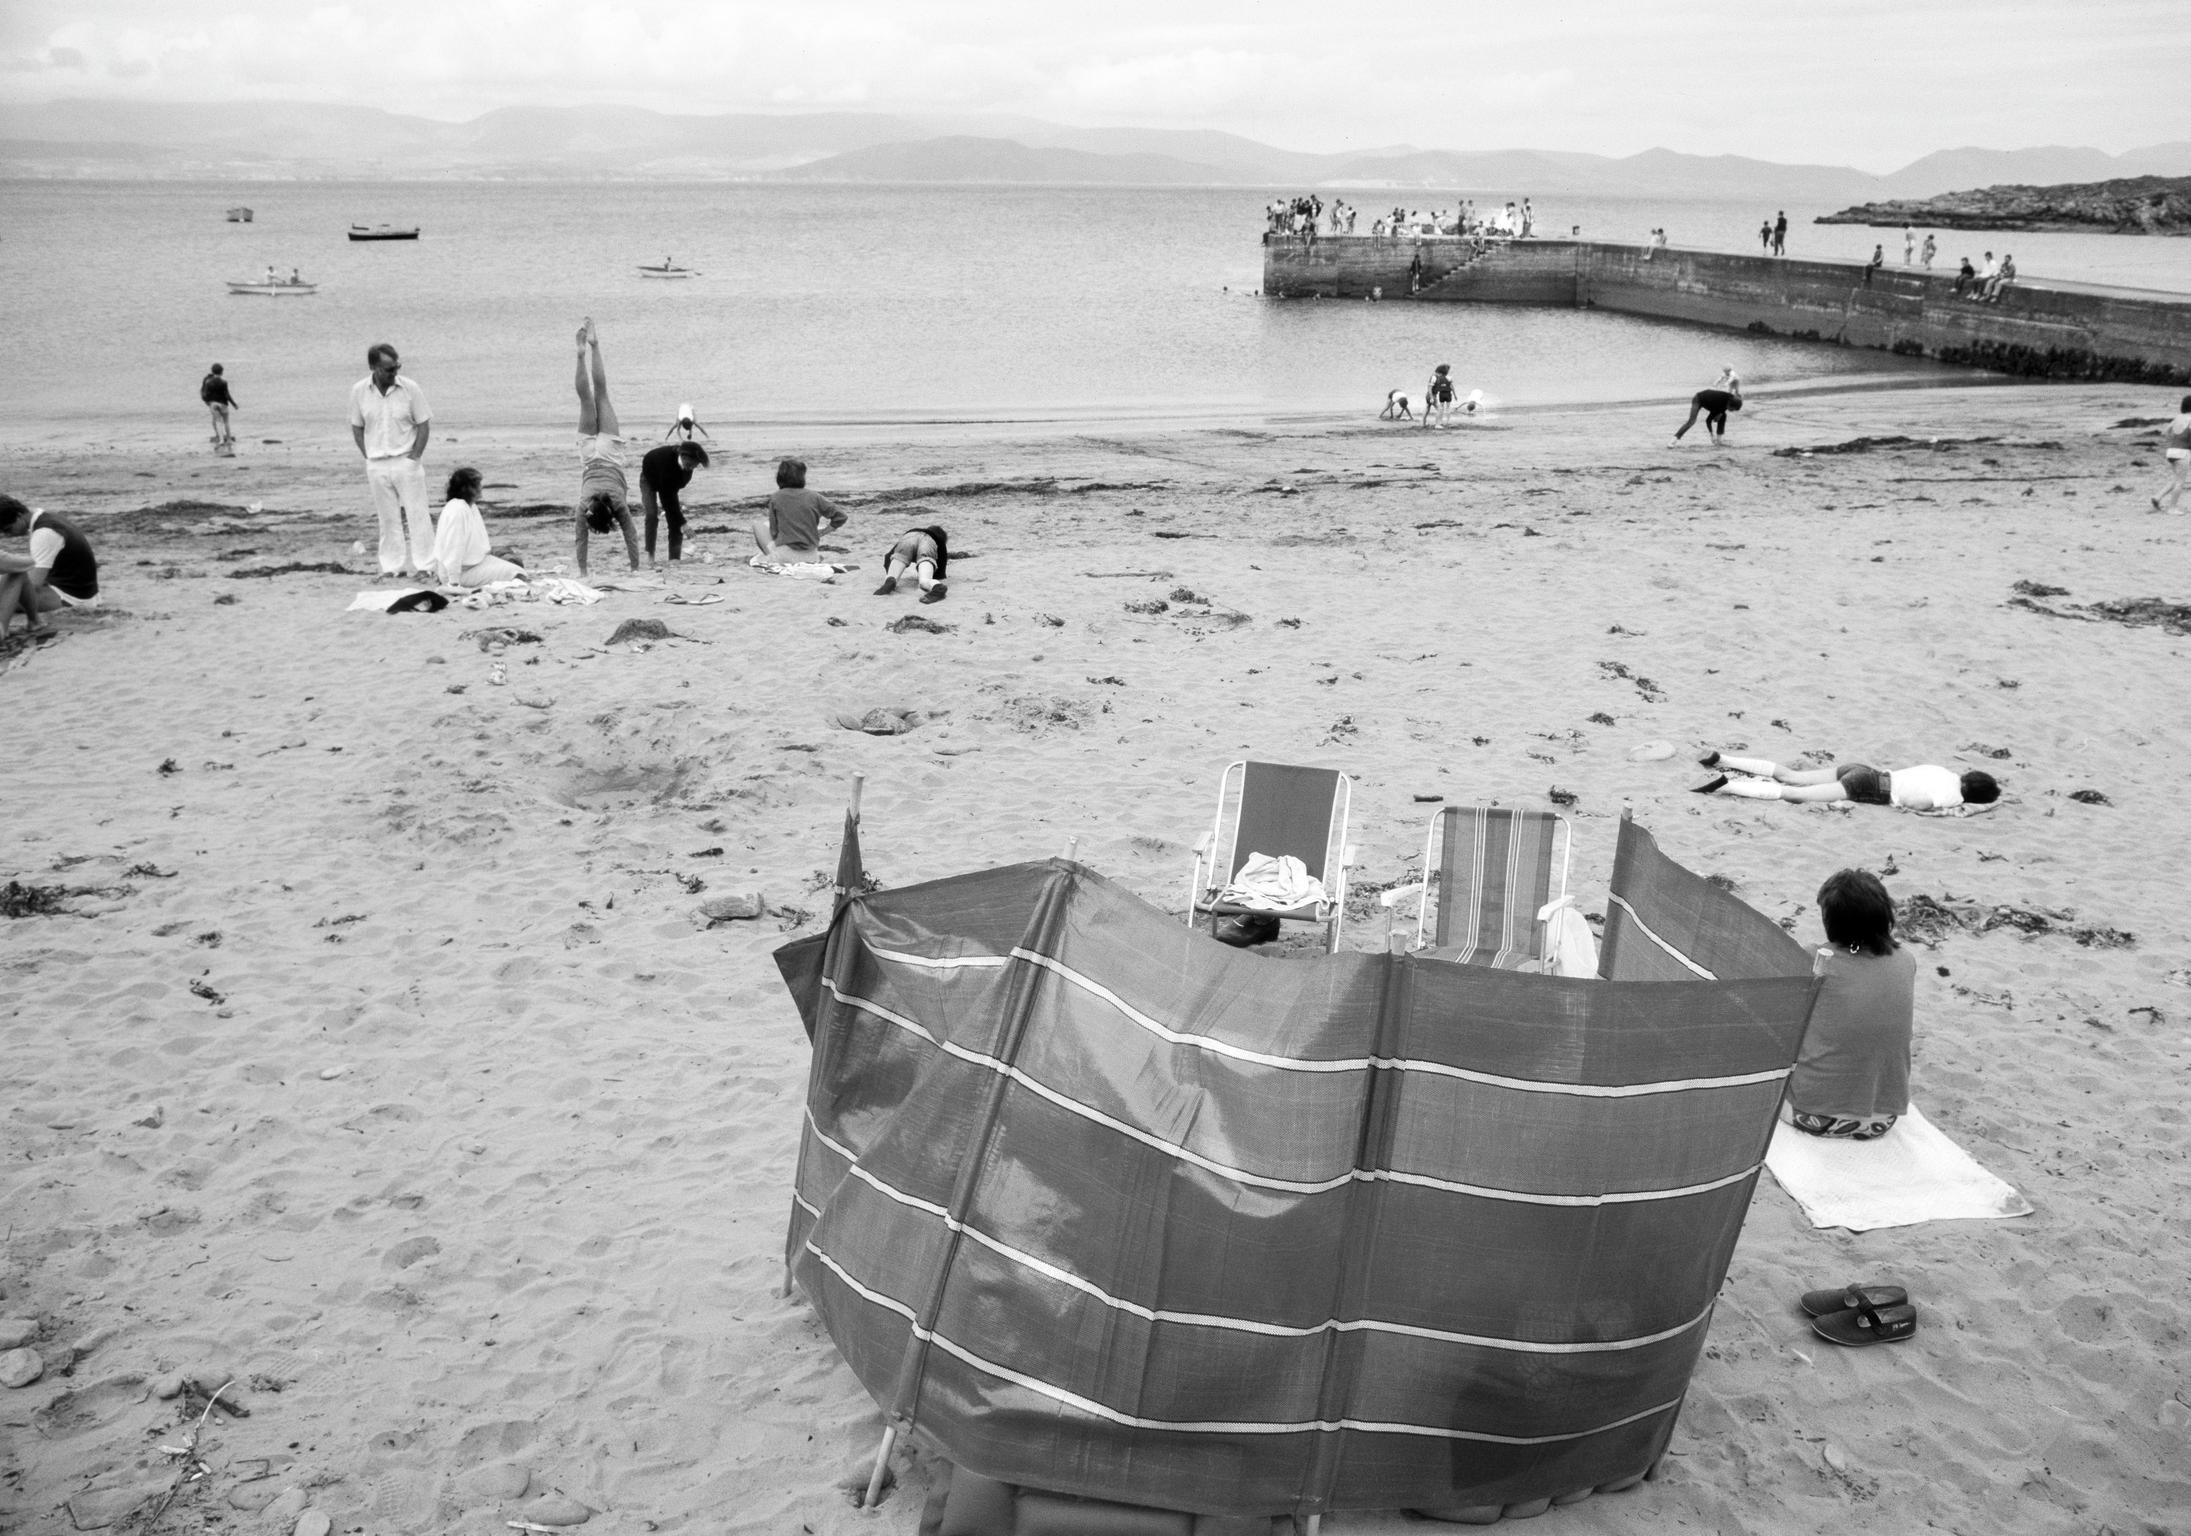 An area where you will seldom see a tourist. Local families enjoy the beach in each their particular way. Kells Bay. Ireland